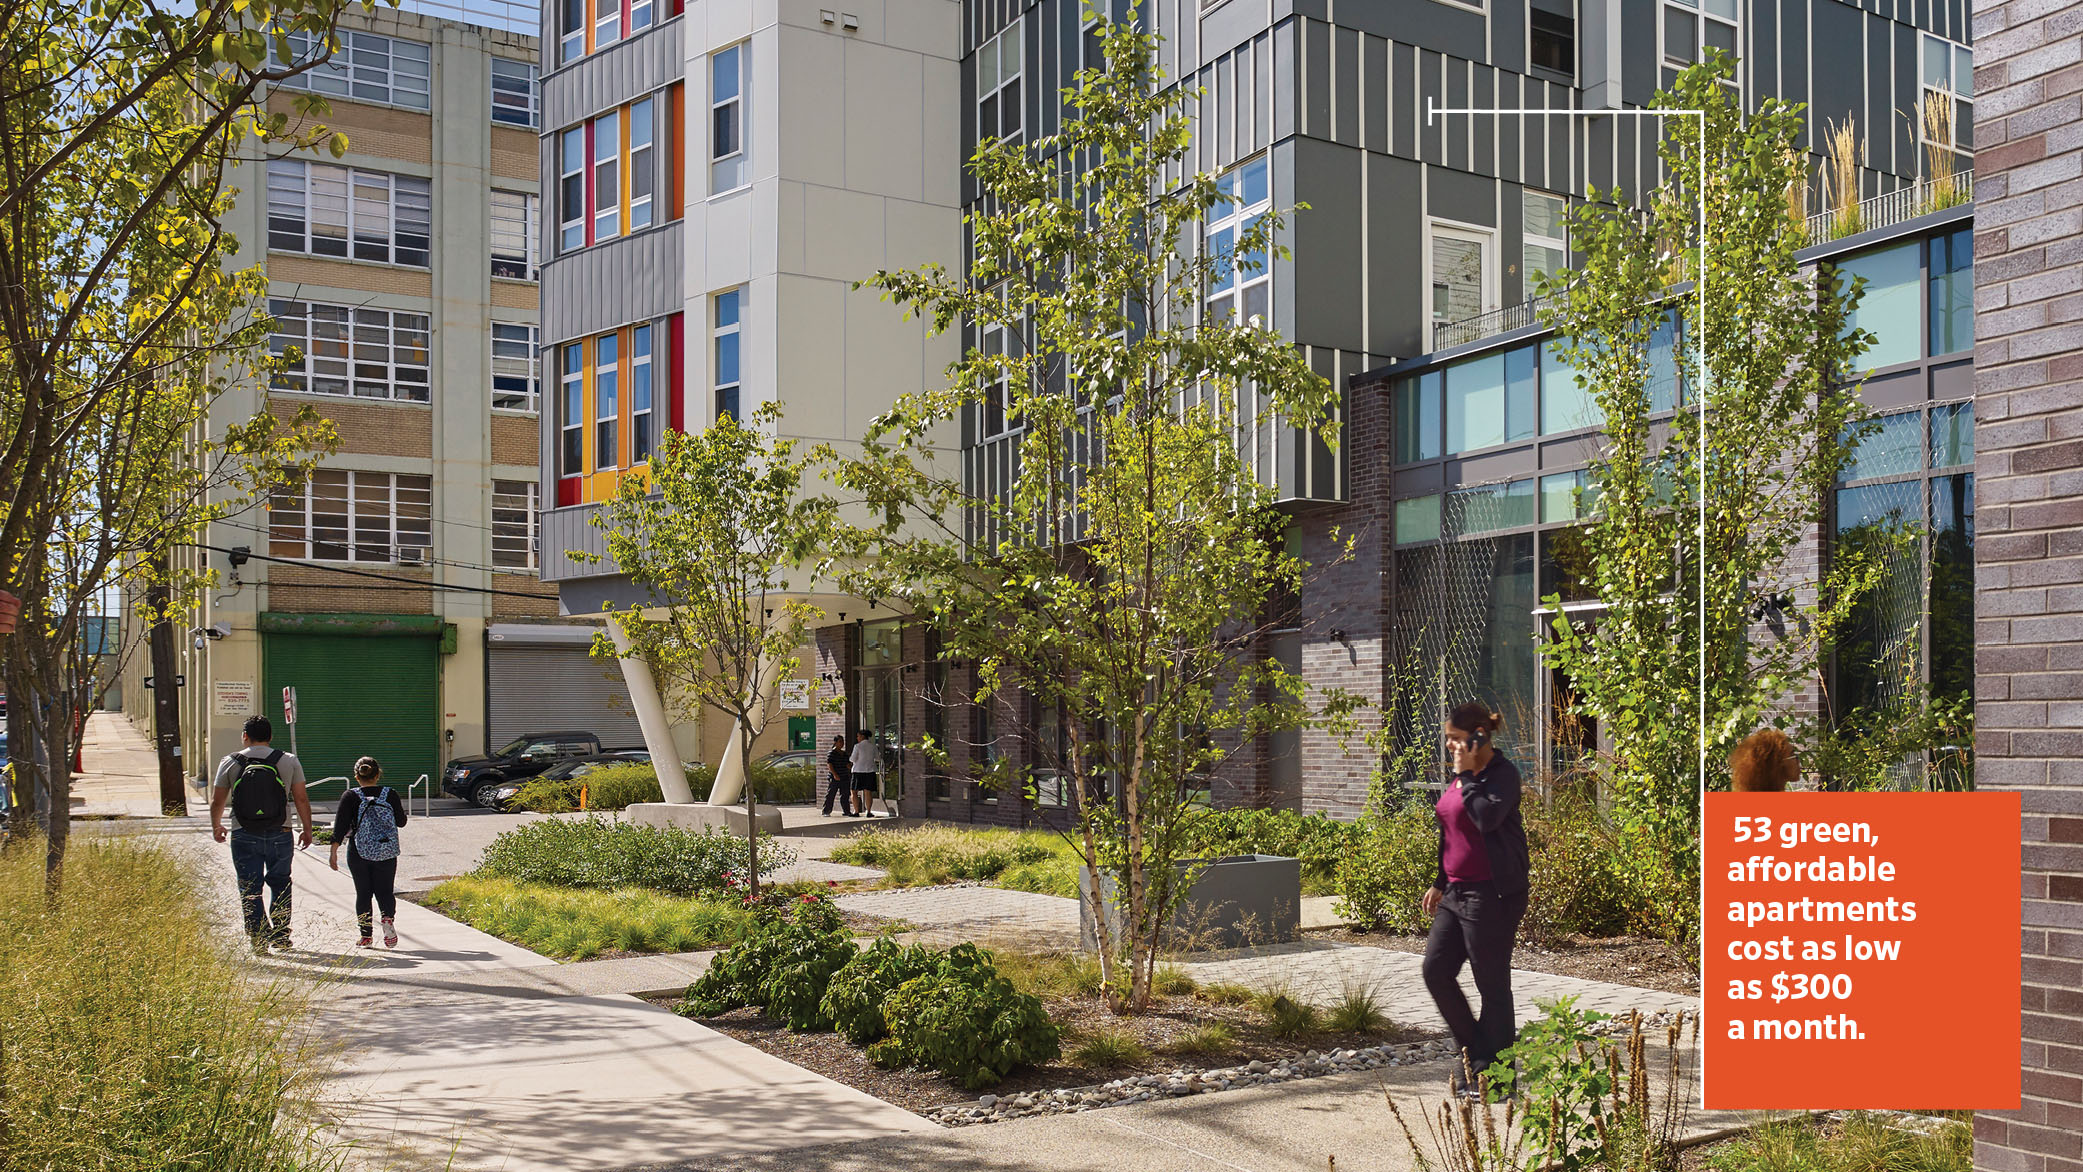 Paseo Verde, an affordable, sustainable housing complex in North Philadelphia, features a green street in the foreground and a building with an interior courtyard.